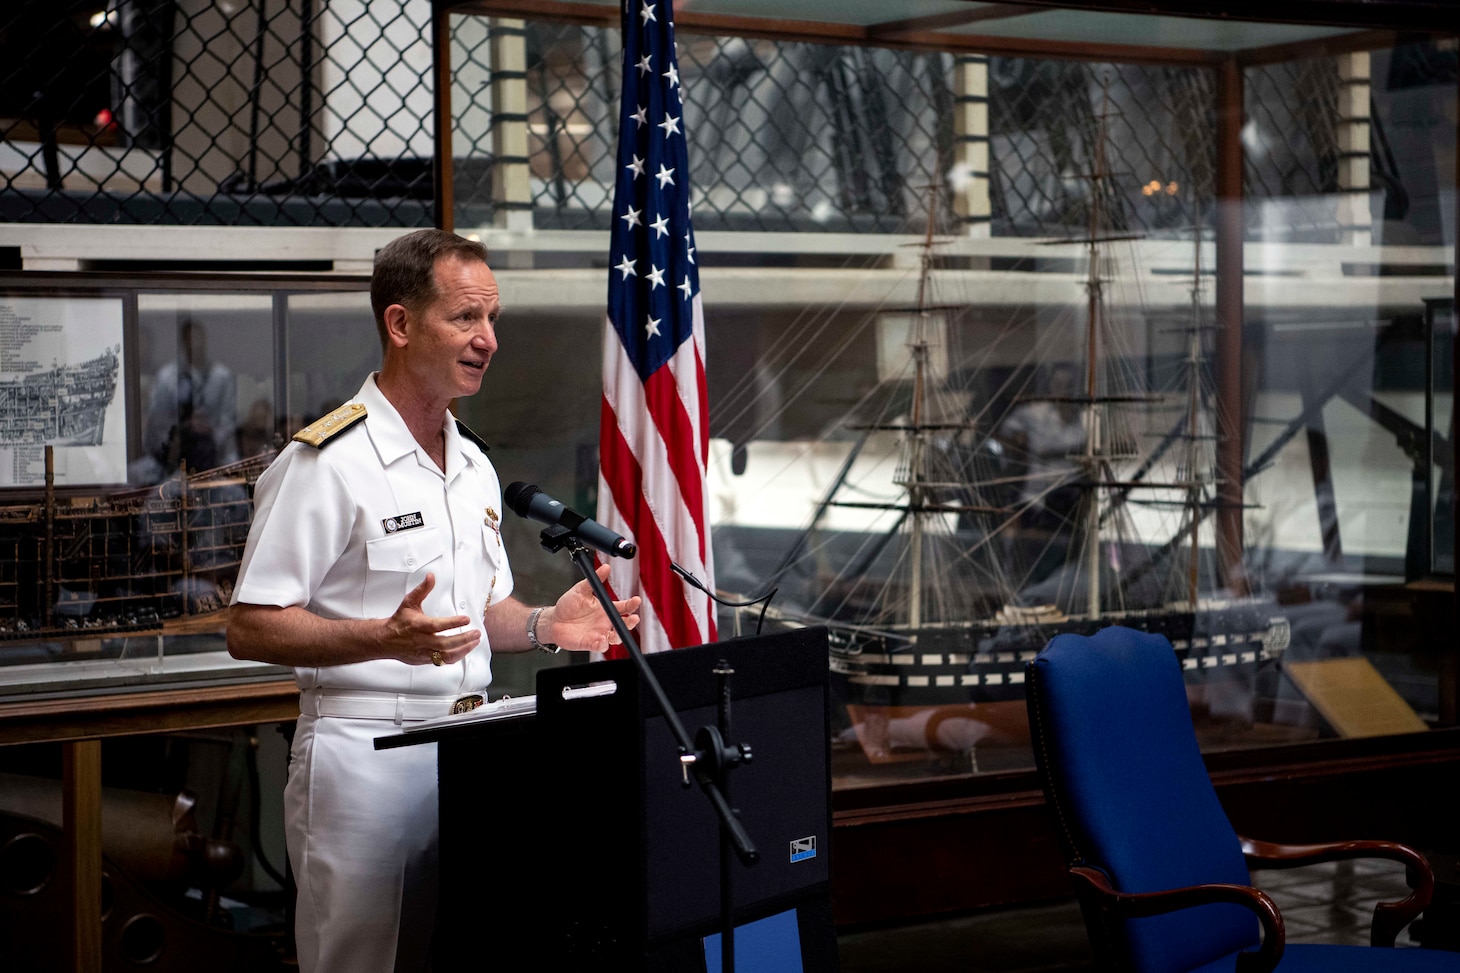 WASHINGTON (May 19, 2023) -- Vice Adm. John Mustin, Chief of Navy Reserve and Commander, Navy Reserve Force announced the selection of CTR1(IW/EXW) Lewis McClintock, as the 2022 Navy Reserve Sailor of the Year. Petty Officer McClintock is from San Diego, Calif., currently assigned to NR C10F NIOCHI NIC (CNIFR). As a result of his selection, CTR1 McClintock will be recommended to the Chief of Naval Personnel for meritorious advancement to the rank of chief petty officer.

The other finalists were:

BM1(EXW) Scott Graham, MSRON 8 (NECC), from Seekonk, Mass.
RP1(SCW) Michael Pornovets, COMNAVSURFPAC (PACFLT), from Biloxi, Miss.
MA1 Jose Rivera,NR NSF AUTEC (NAVSEA), from West Palm Beach, Fla.
HM1(FMF) Daniel Vetan, MFR/MFS (4th MED BATTALION), from Oakland Park, Fla. 

The finalists were recognized 15-19 May 2023 during the Navy Reserve Sailor of the Year recognition week, hosted by FORCM Tracy Hunt. (U.S. Navy photo by Chief Mass Communication Specialist Elisandro T. Diaz)